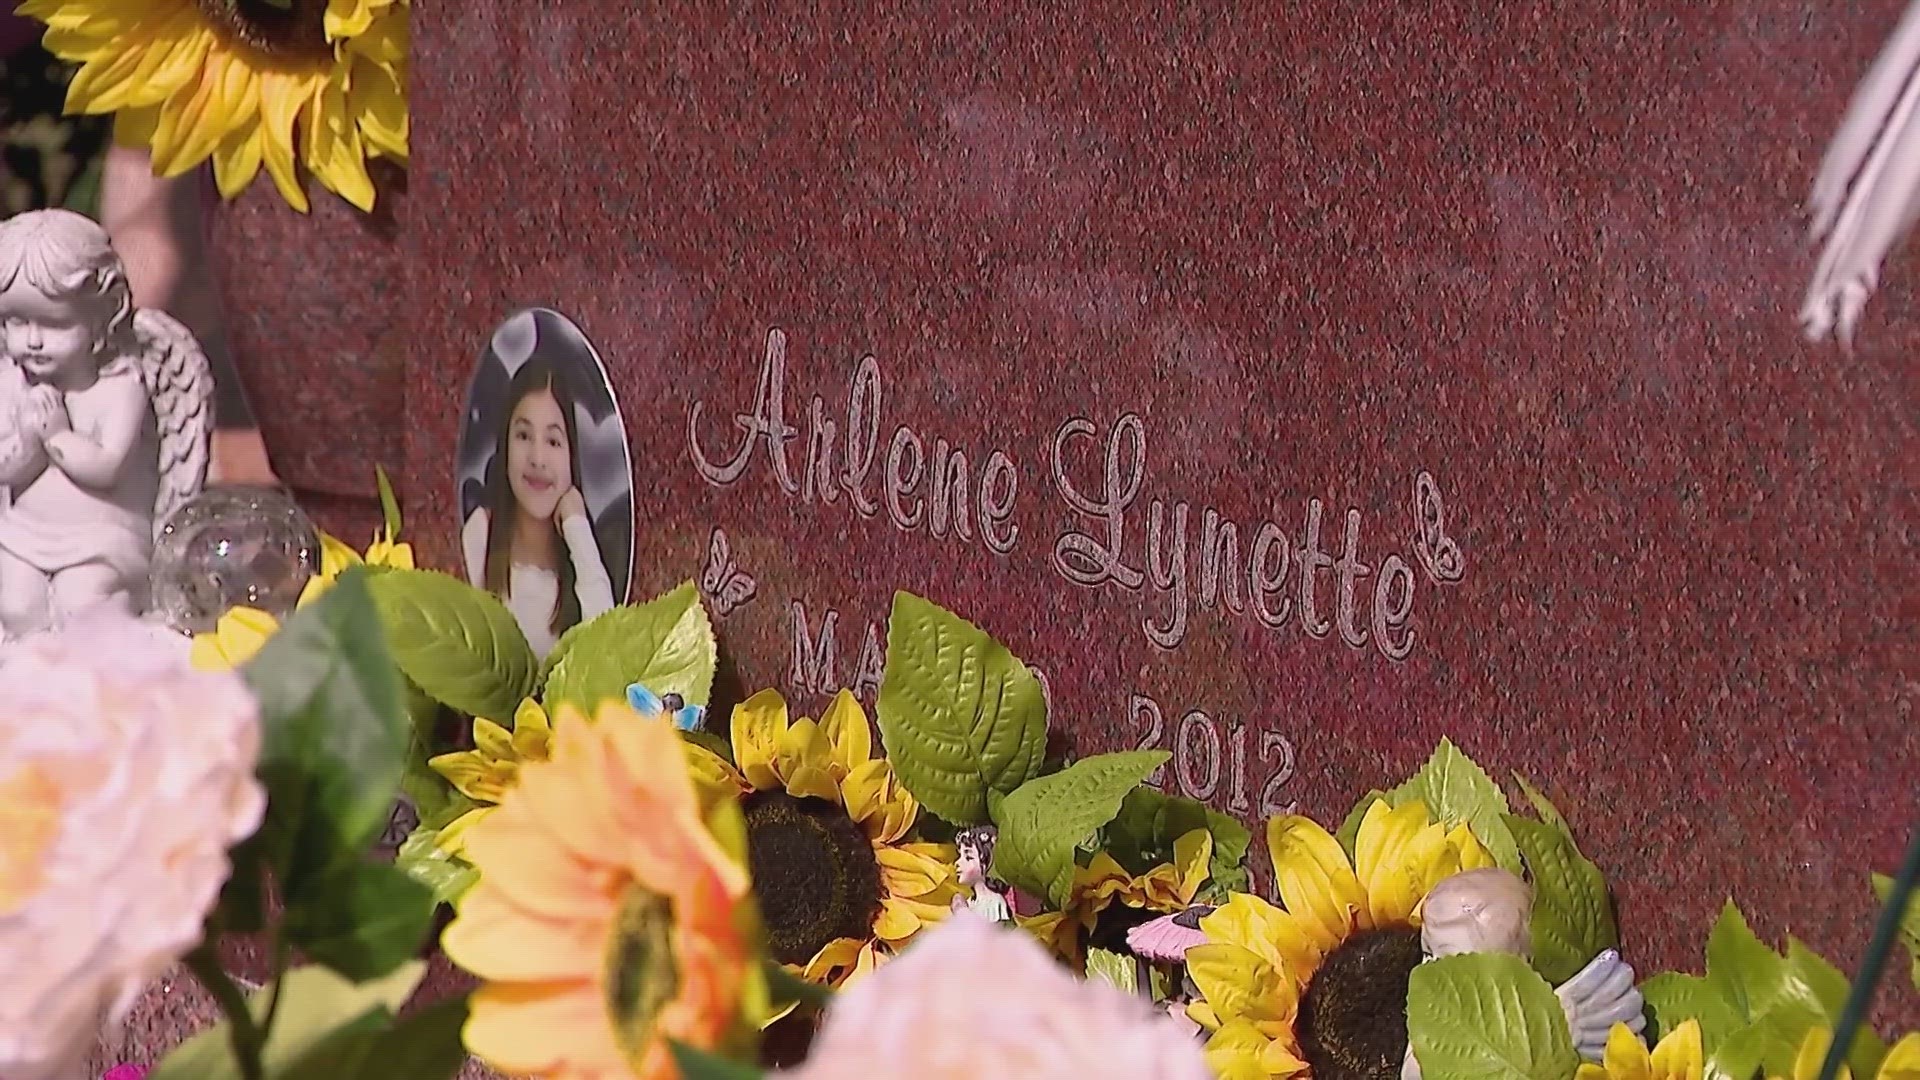 Arlene Alvarez was the 9-year-old girl who was shot and killed on Feb. 14, 2022, as she and her family were headed to Spanky's Pizza to celebrate Valentine's Day.